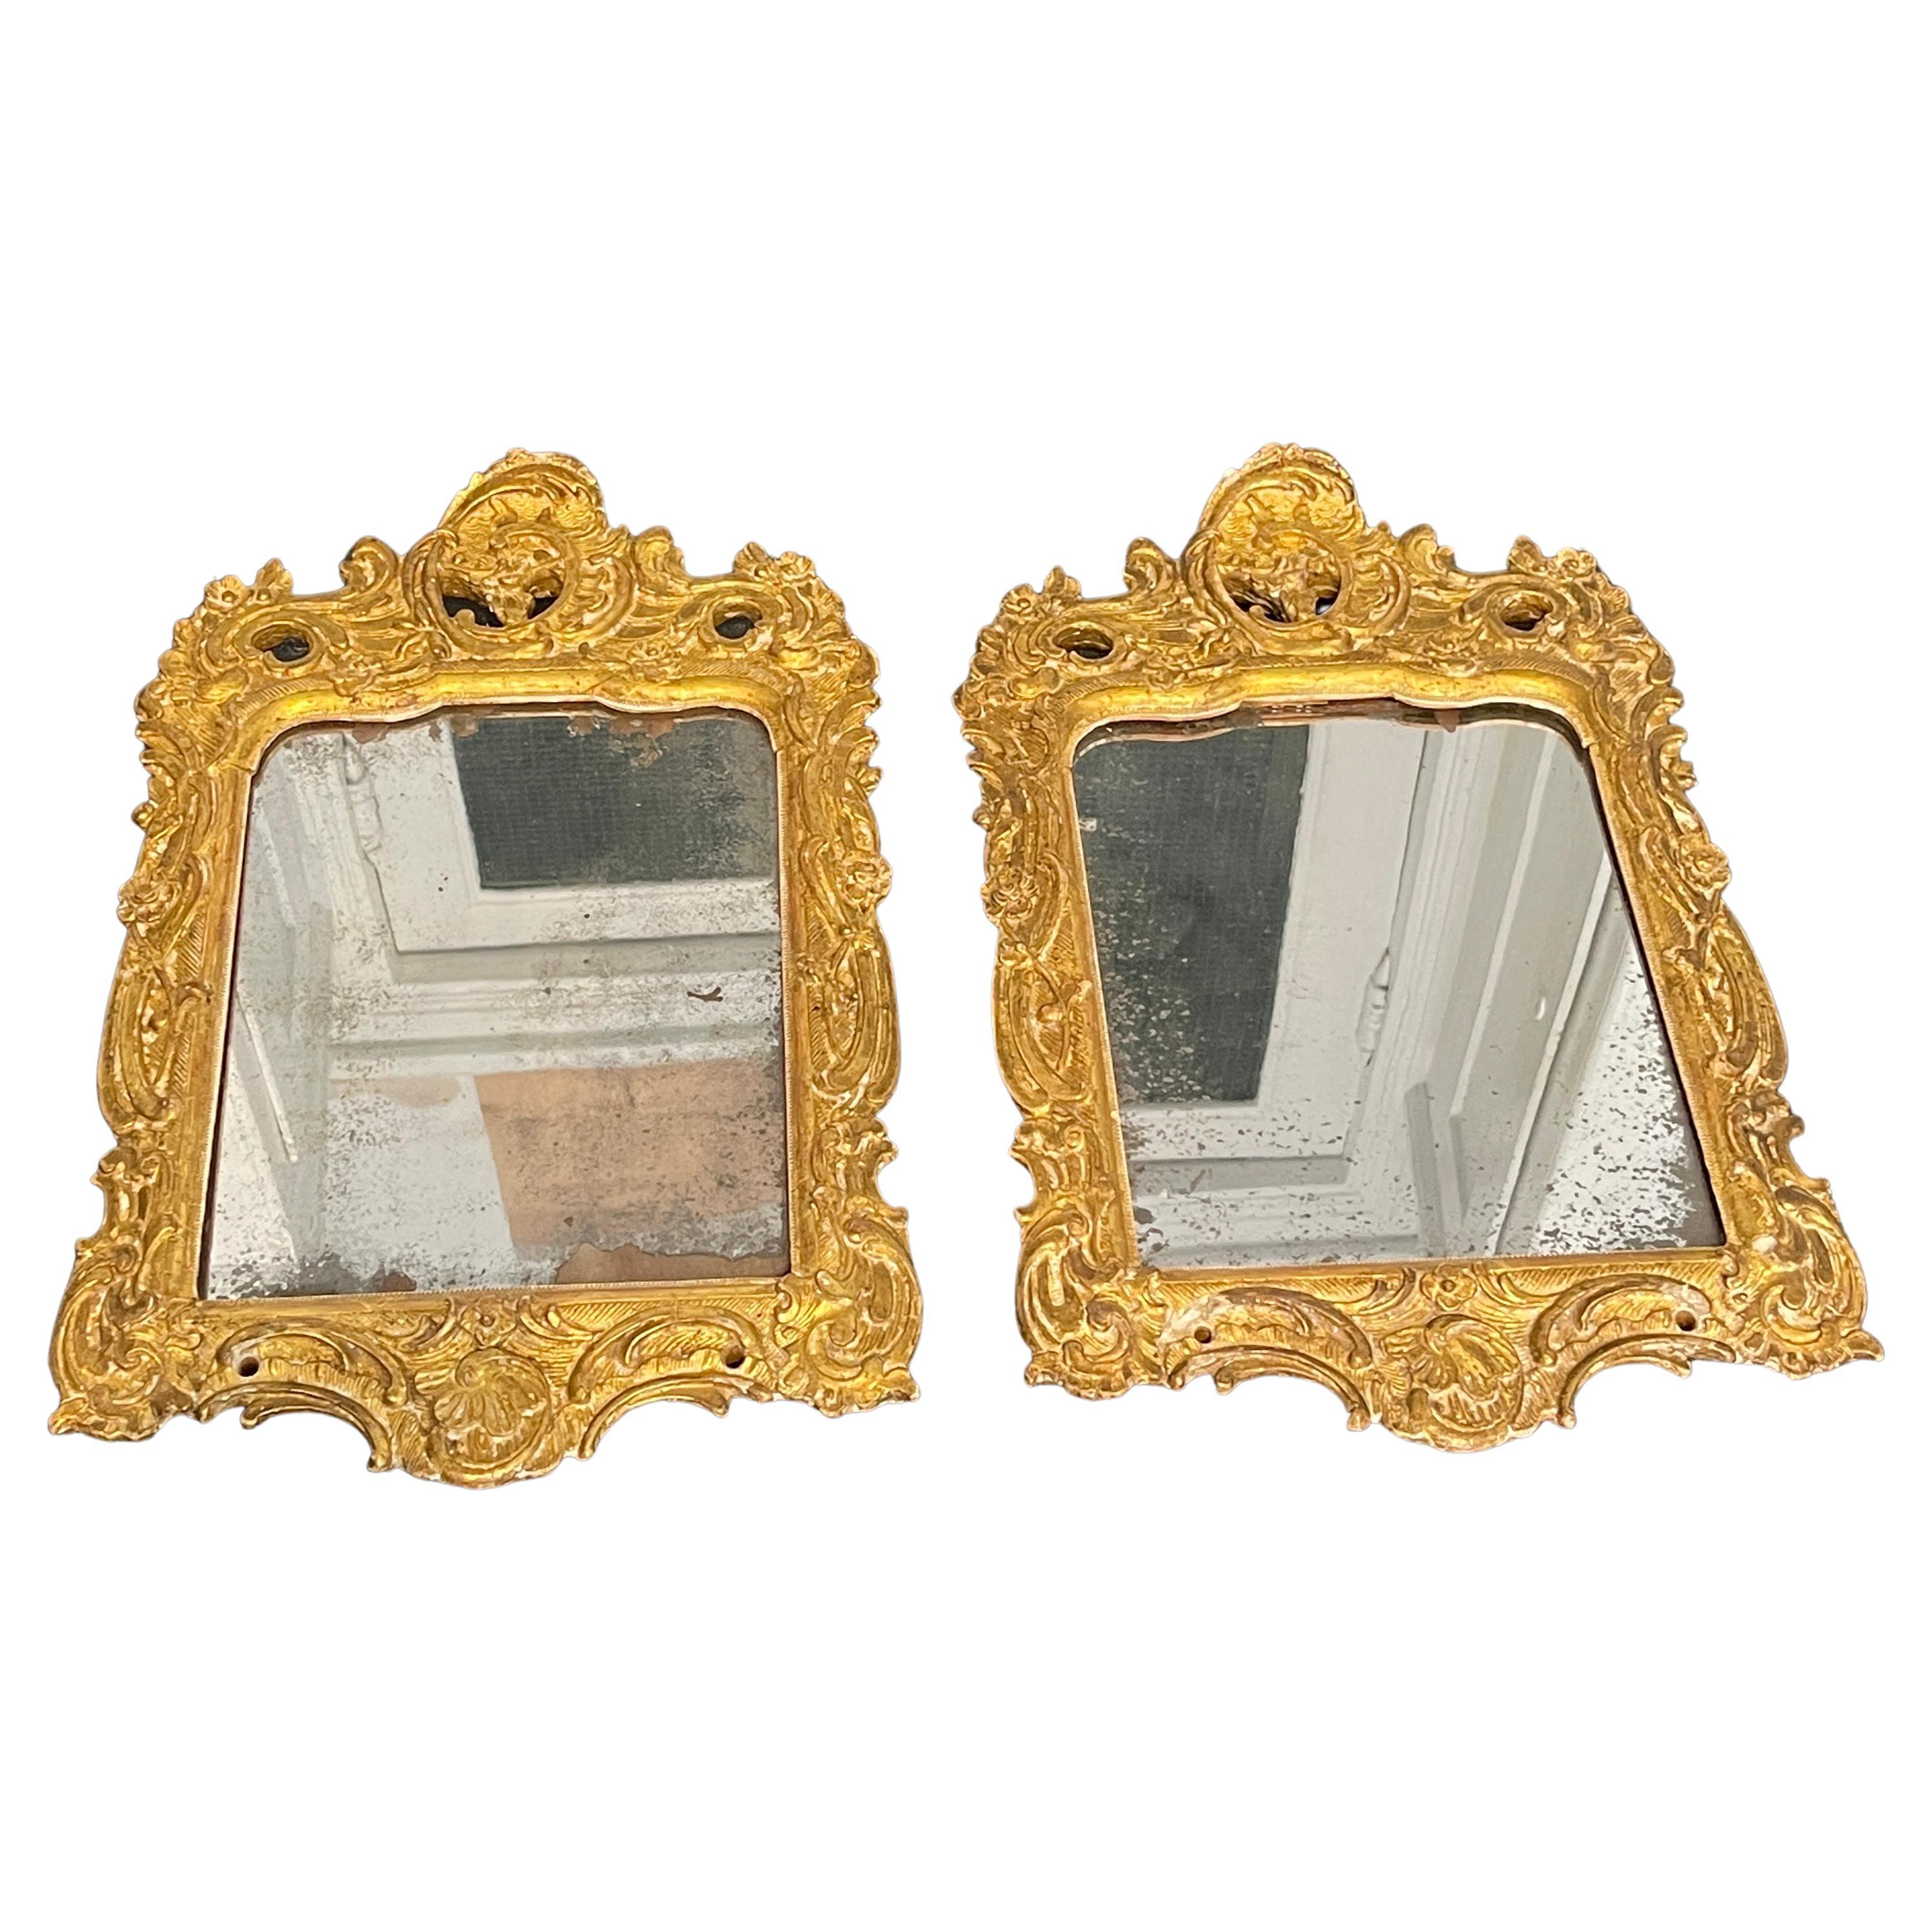 Danish Pair of Small Gilded Rococo Wall Mirrors, Denmark circa 1780 For Sale